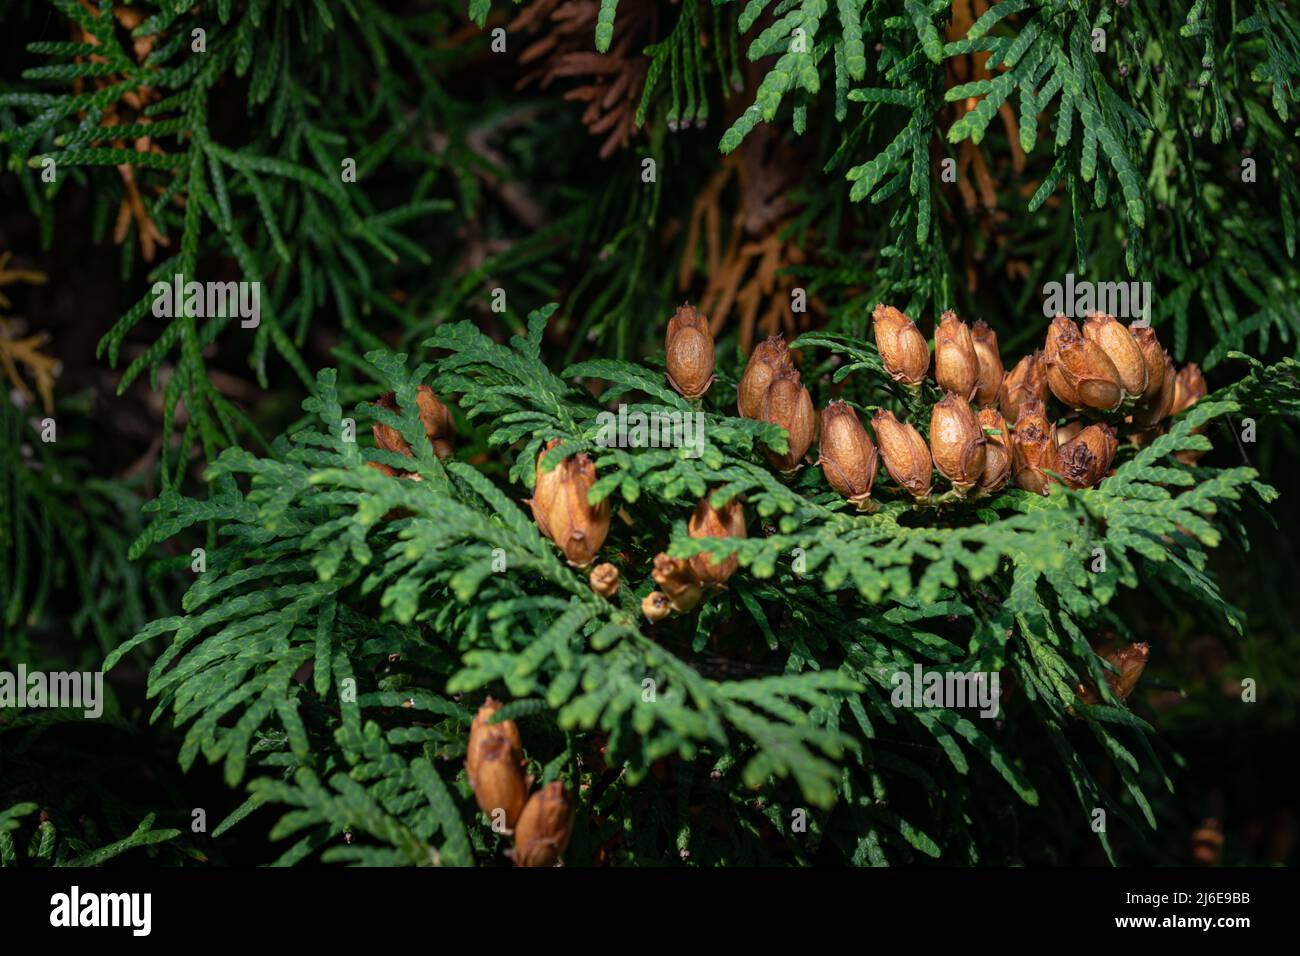 Ripe thuja seeds on a green branch. Gardening and plant propagation. Coniferous trees. Stock Photo